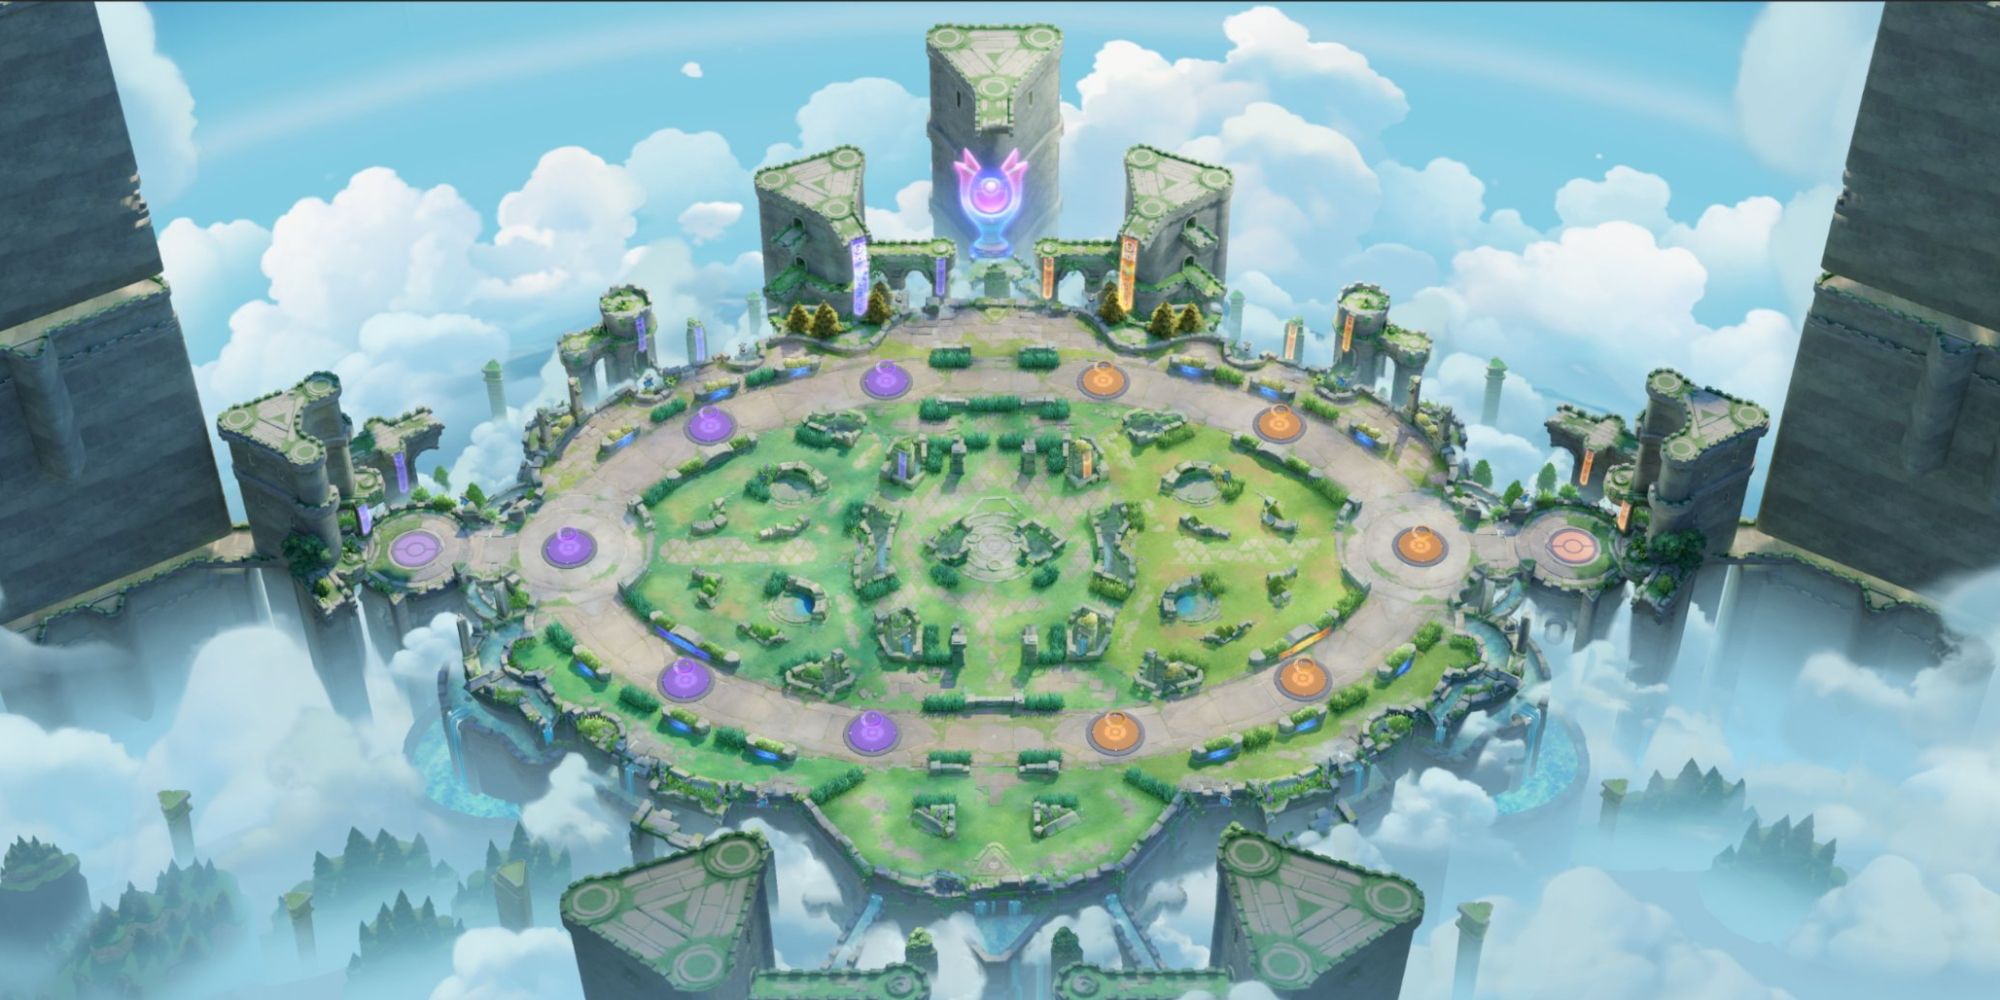 Overhead map of Theia Sky Ruins from Pokemon Unite